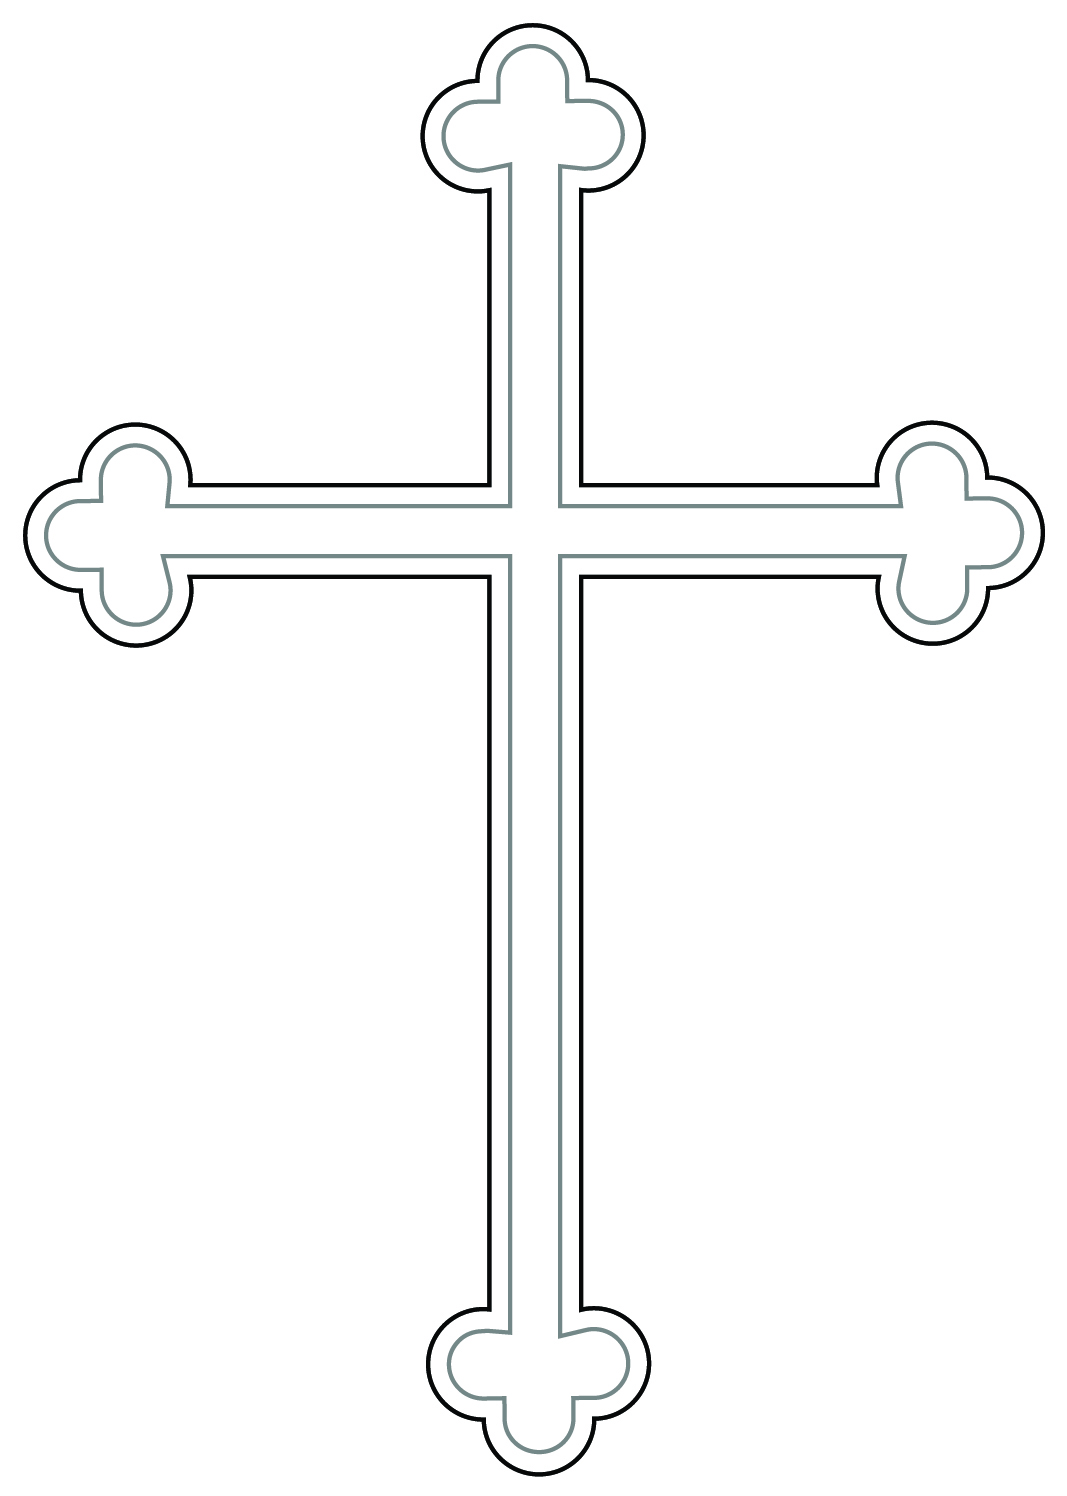 Dove and cross clipart free images 2